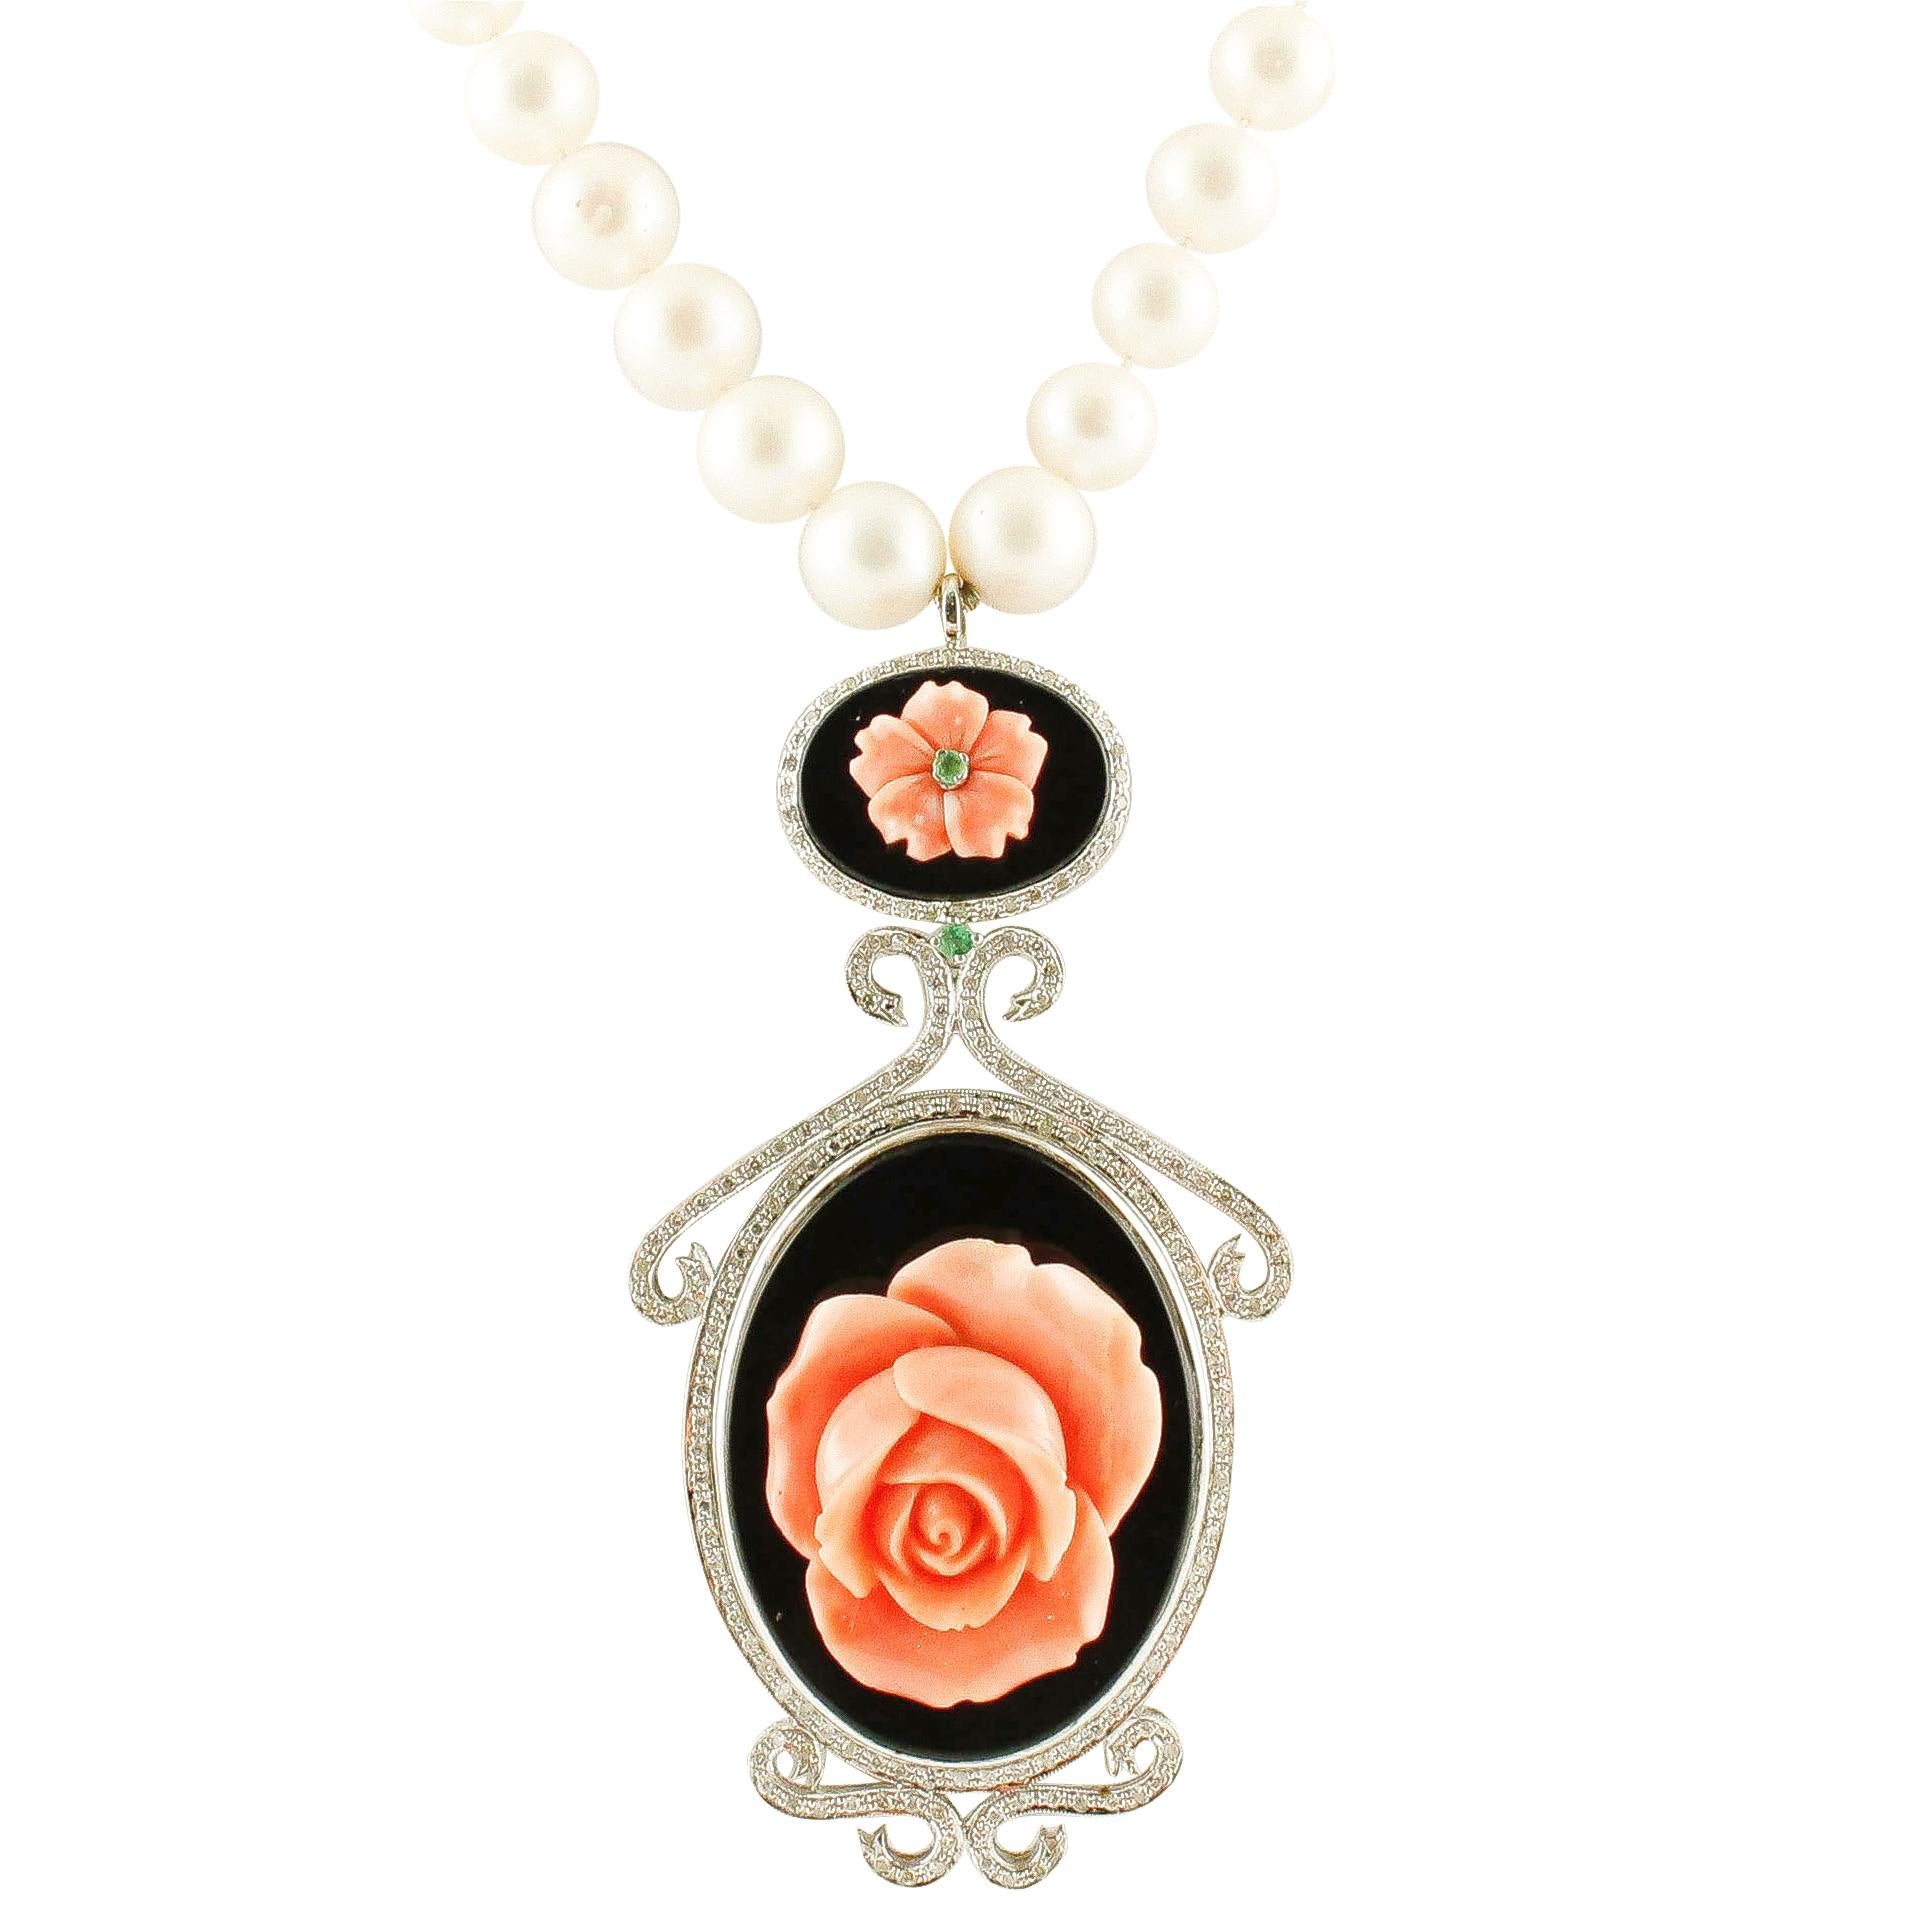 Diamonds, Emerald, Onyx, Coral Flower, Pearl, White Gold Beaded Pendant Necklace